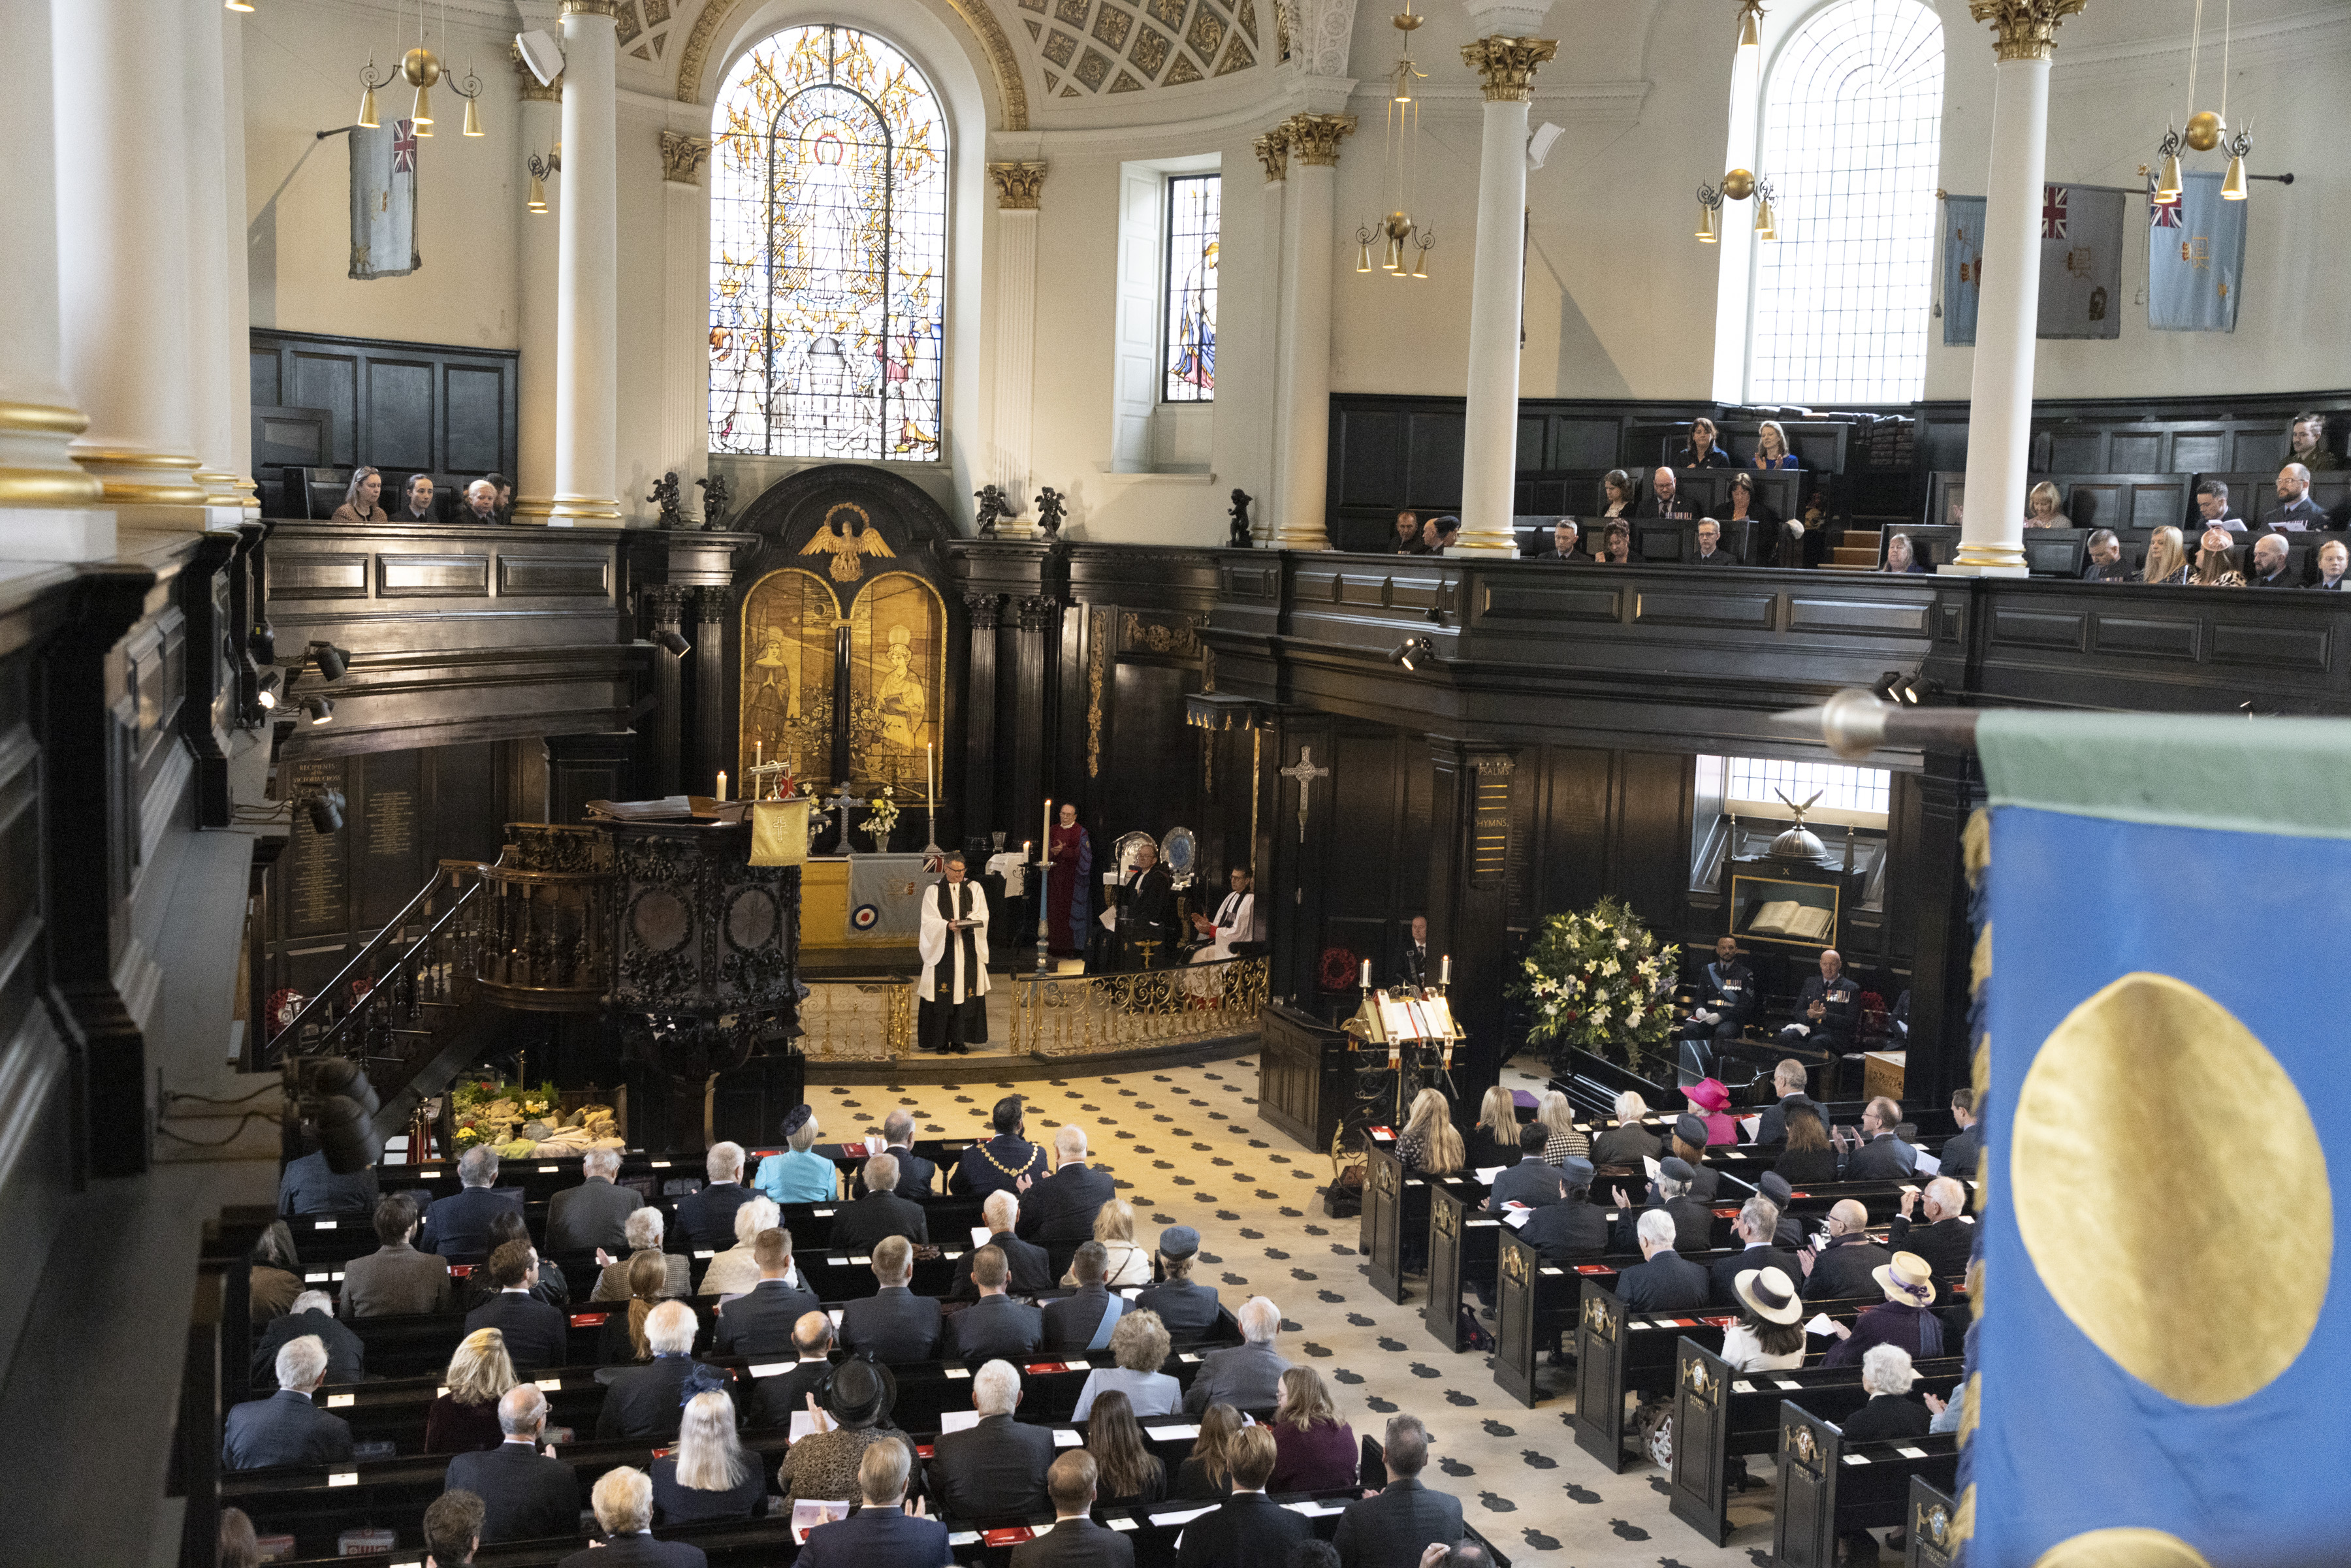 Image shows Reverend leading a service inside St Clements Danes Church.